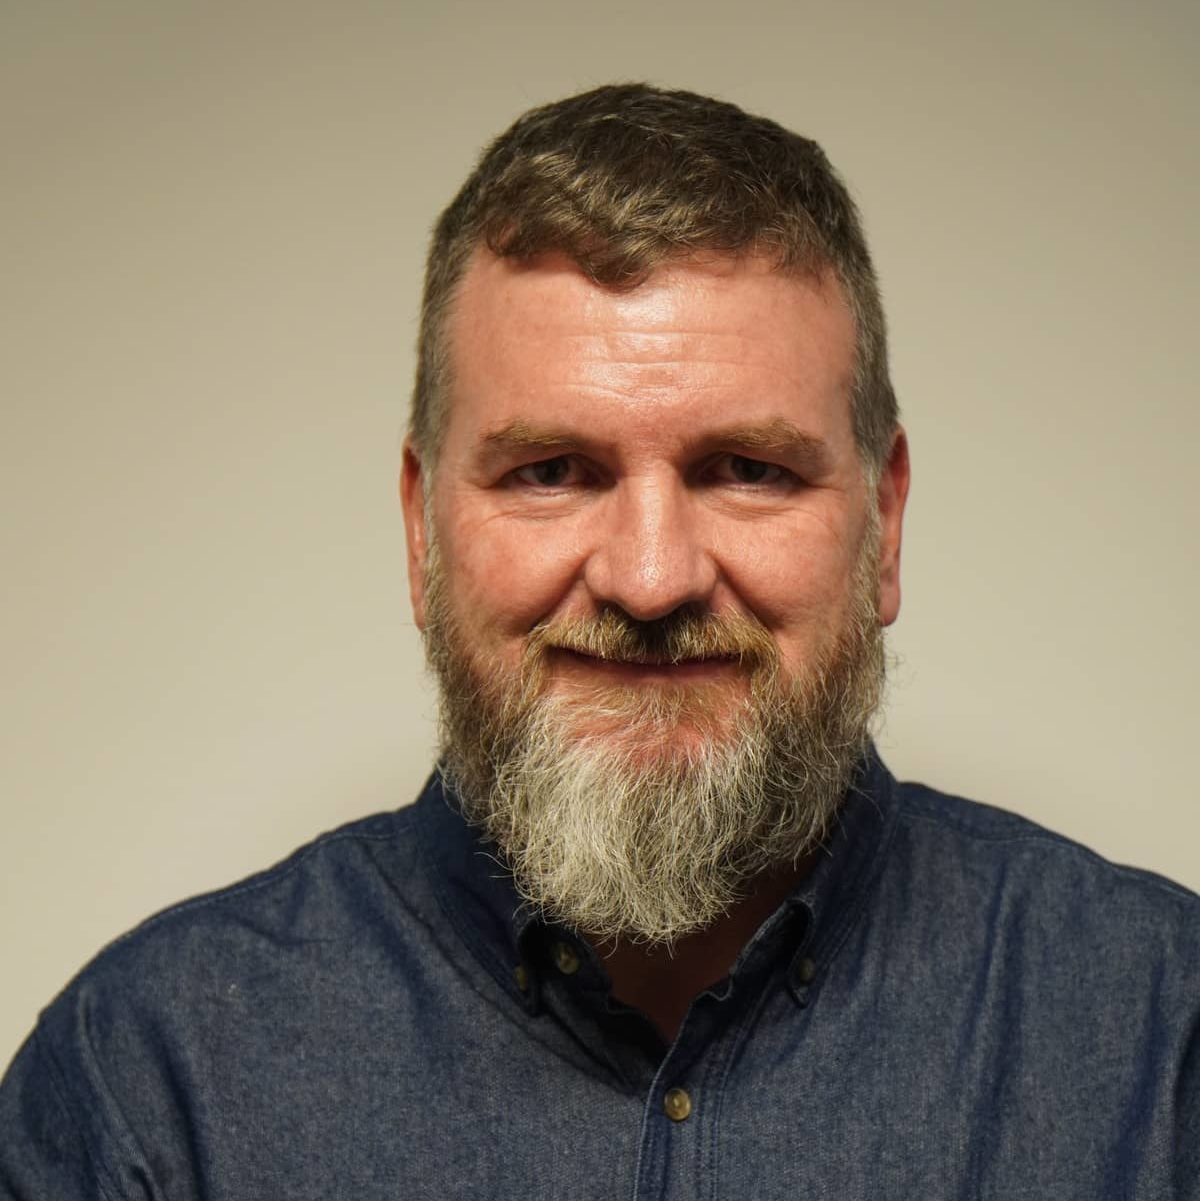 Steve Woods joined Baptist World Aid in May 2019, after over 25 years in Pastoral Ministry in both city and country churches in South Australia.